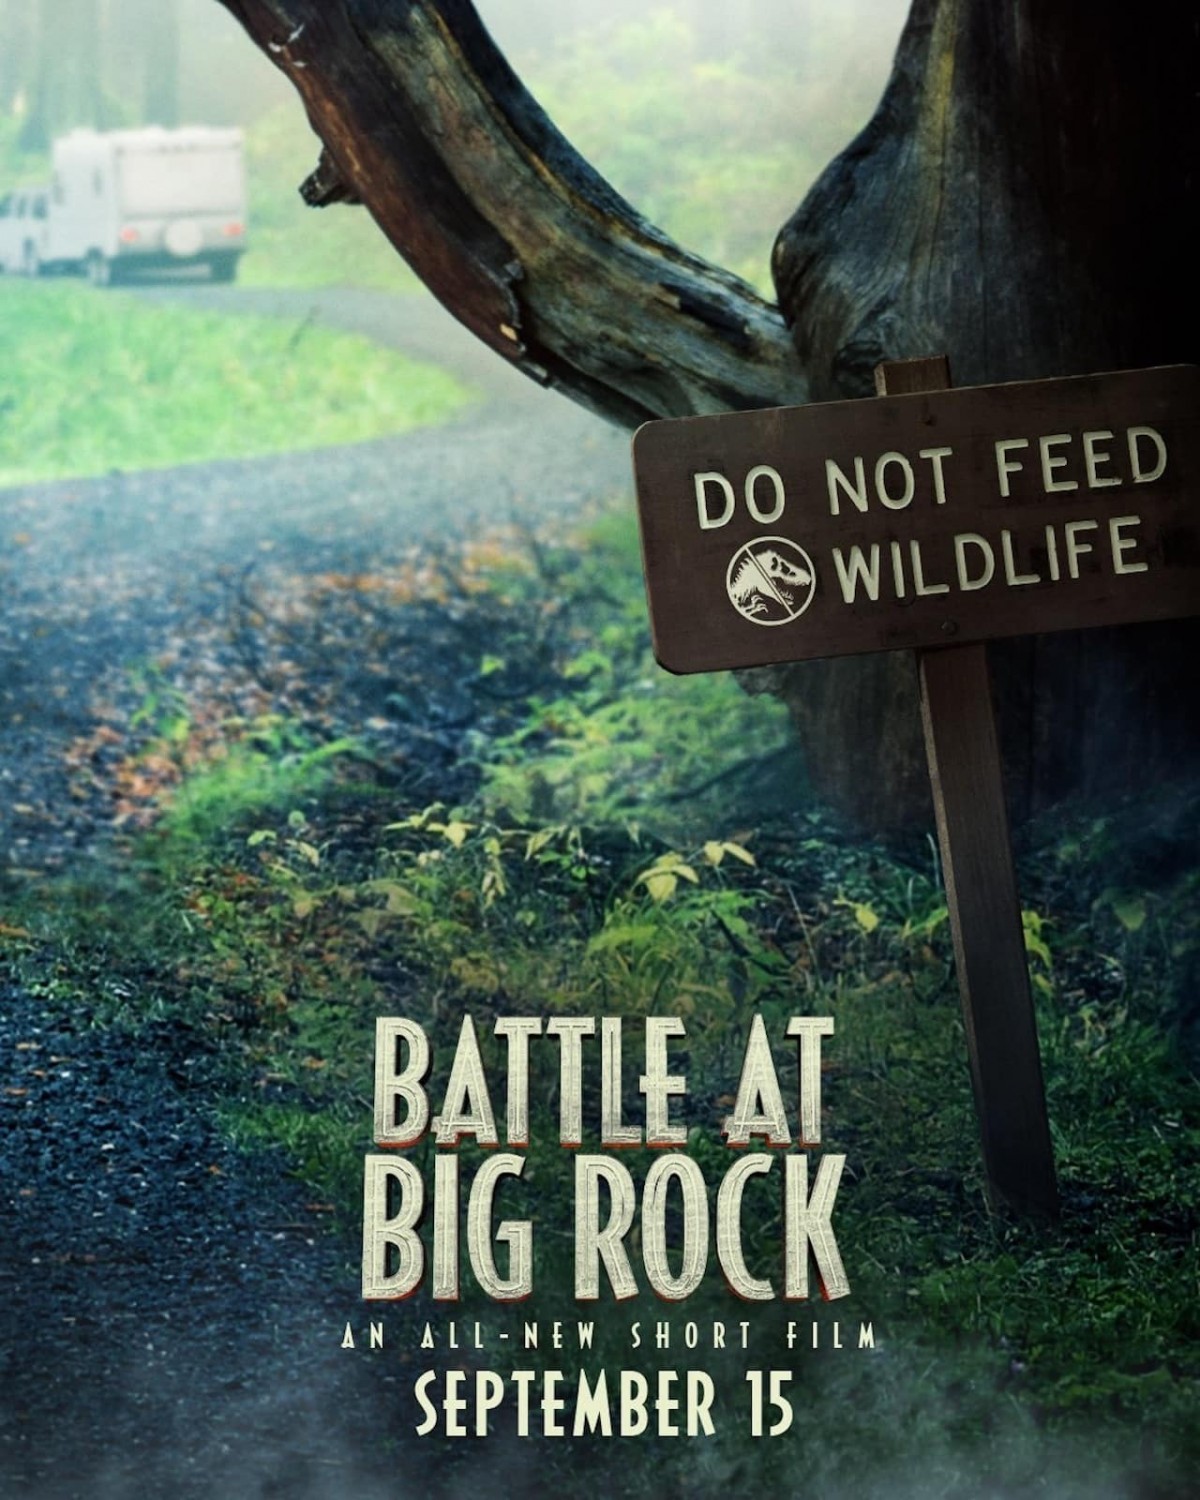 Extra Large Movie Poster Image for Battle at Big Rock